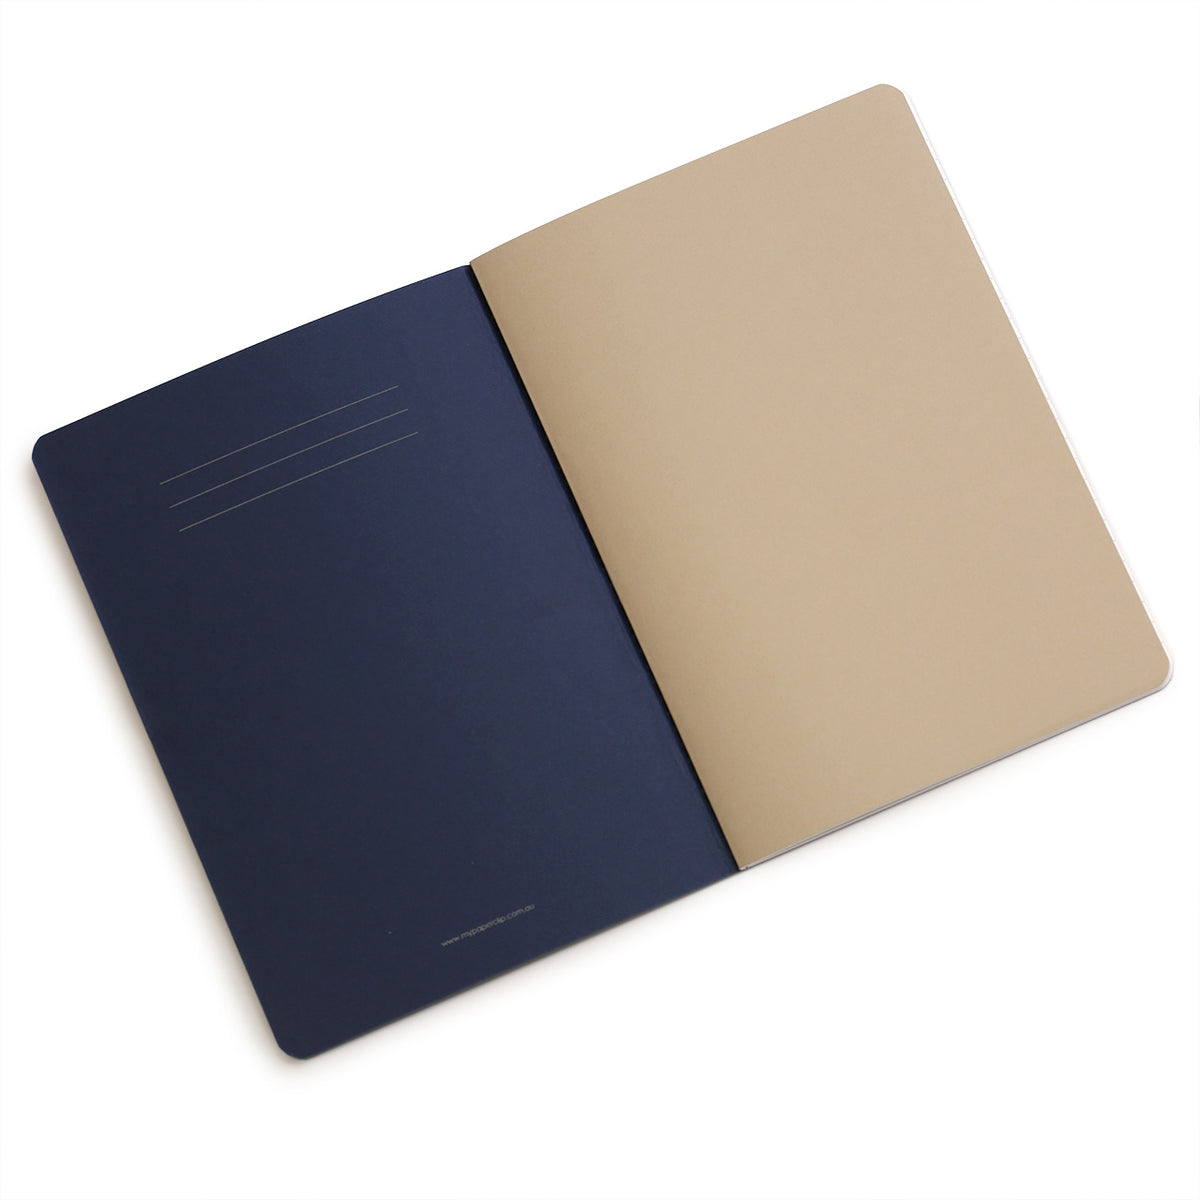 the first inner spread of the A5 refill notebooks shows thie inside cover and the taupe-coloured heavy first page